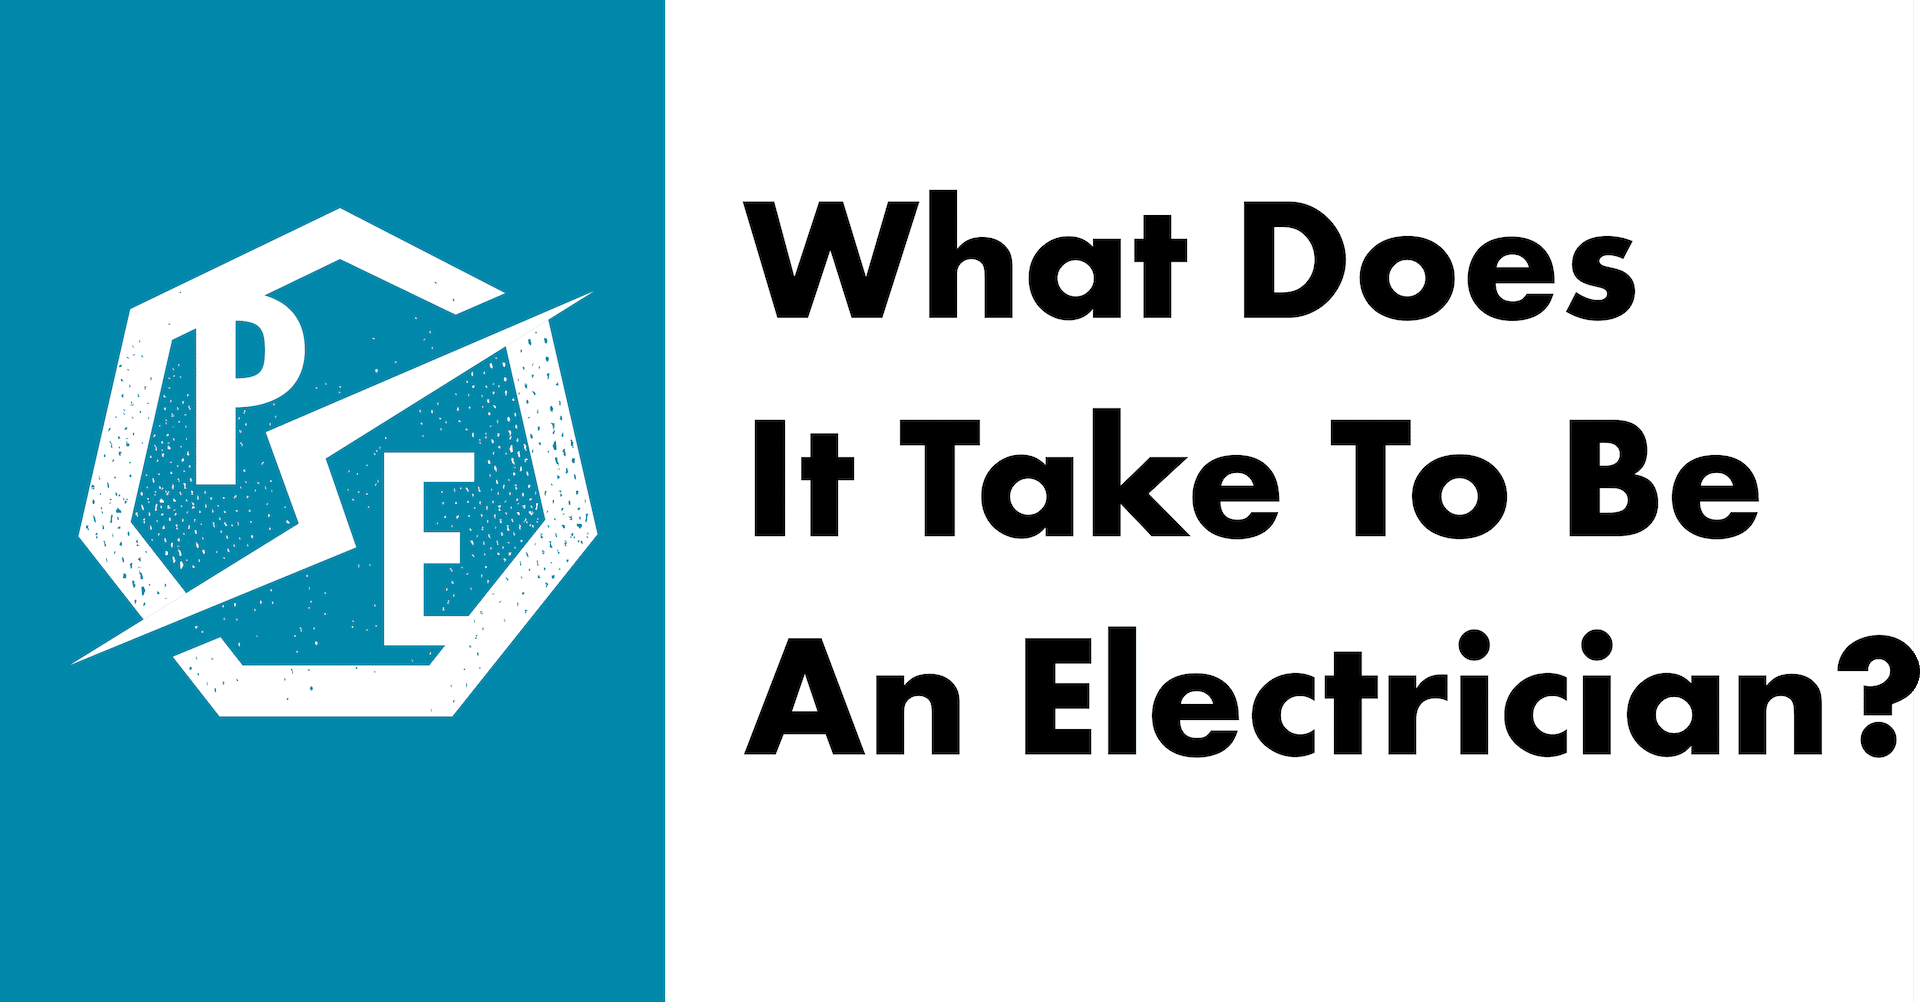 What does it take to become an electrician